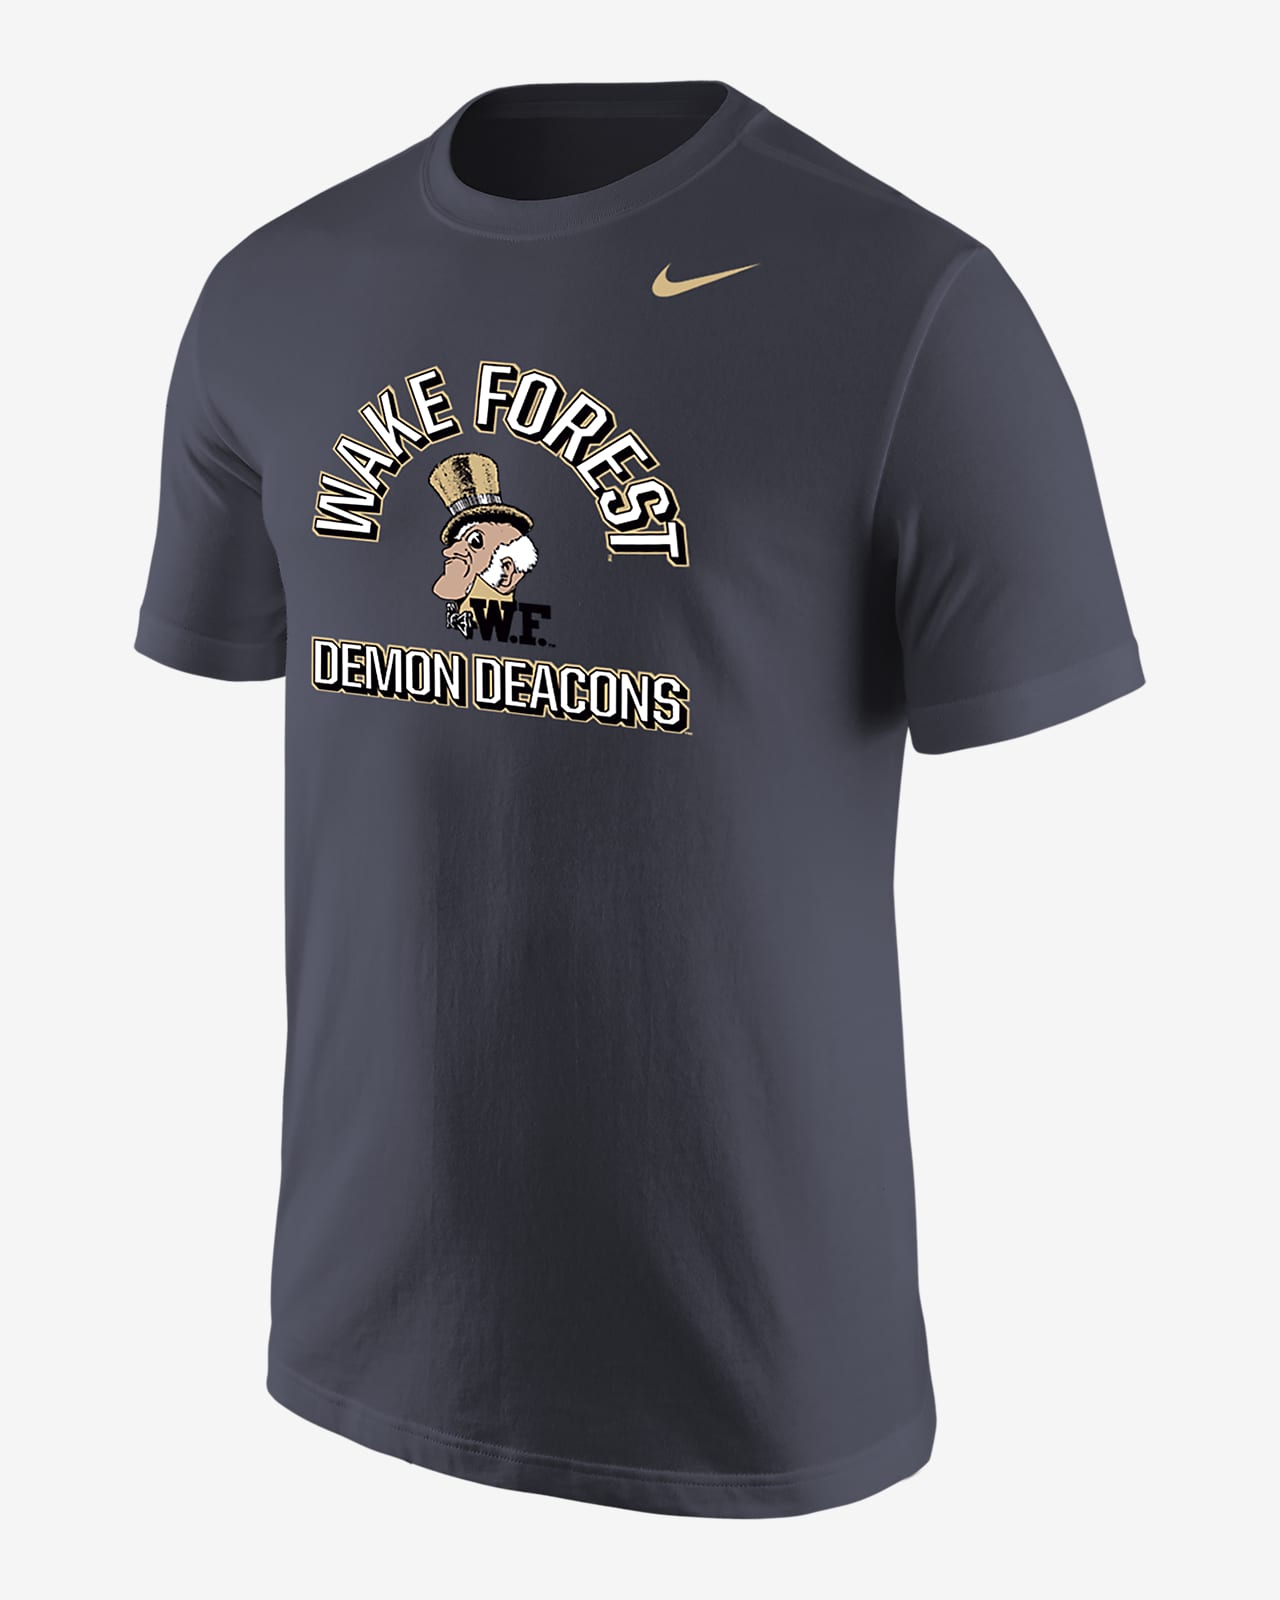 Wake Forest Men's Nike College 365 T-Shirt